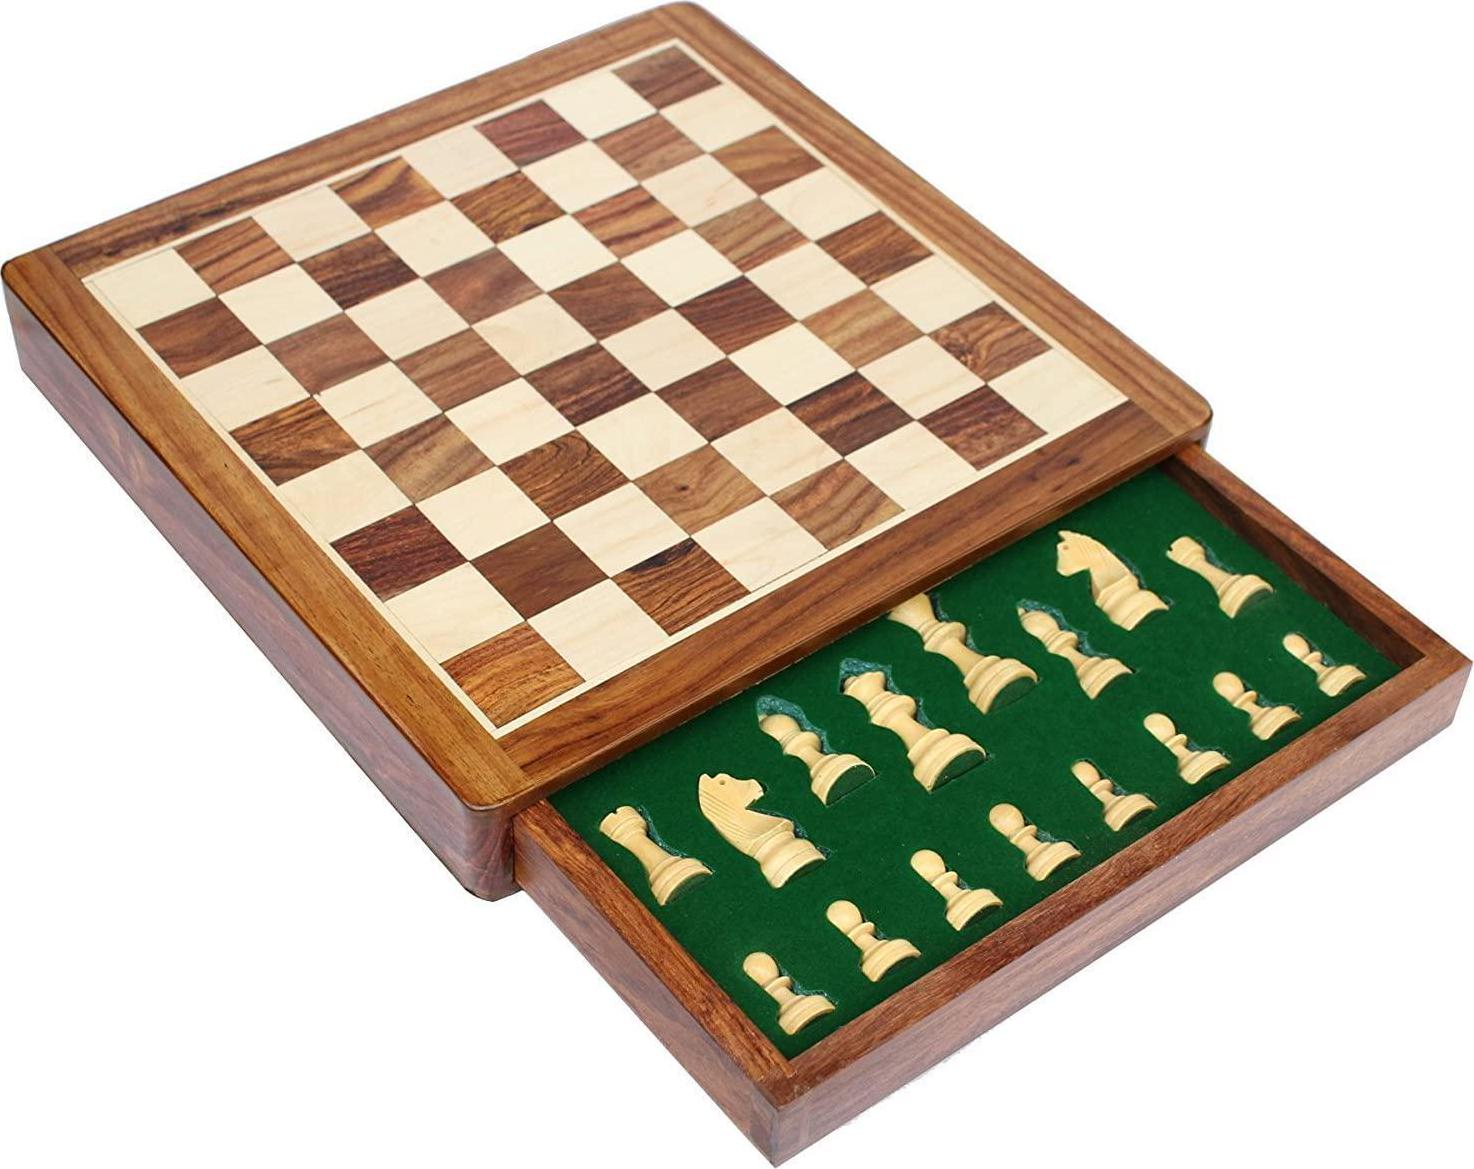 StonKraft, Early Black Fri Xmas Deal Sale - StonKraft Wooden Chess Board Game Set with Magnetic Pieces (12 x 12 Non-Folding with Drawer)